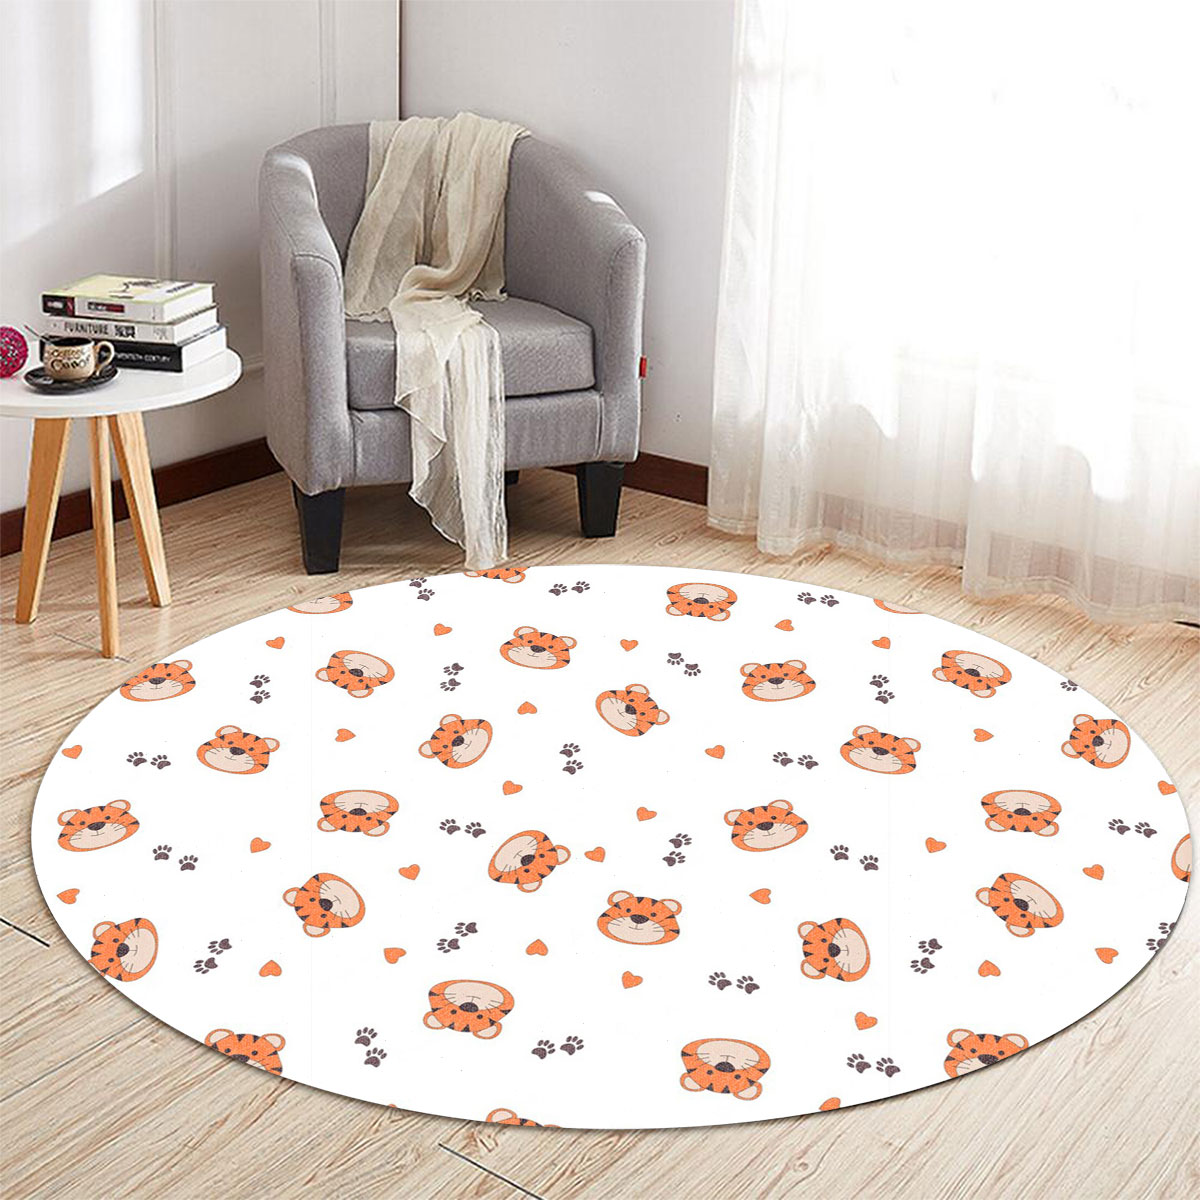 Tiger Heart And Paw Round Carpet 6